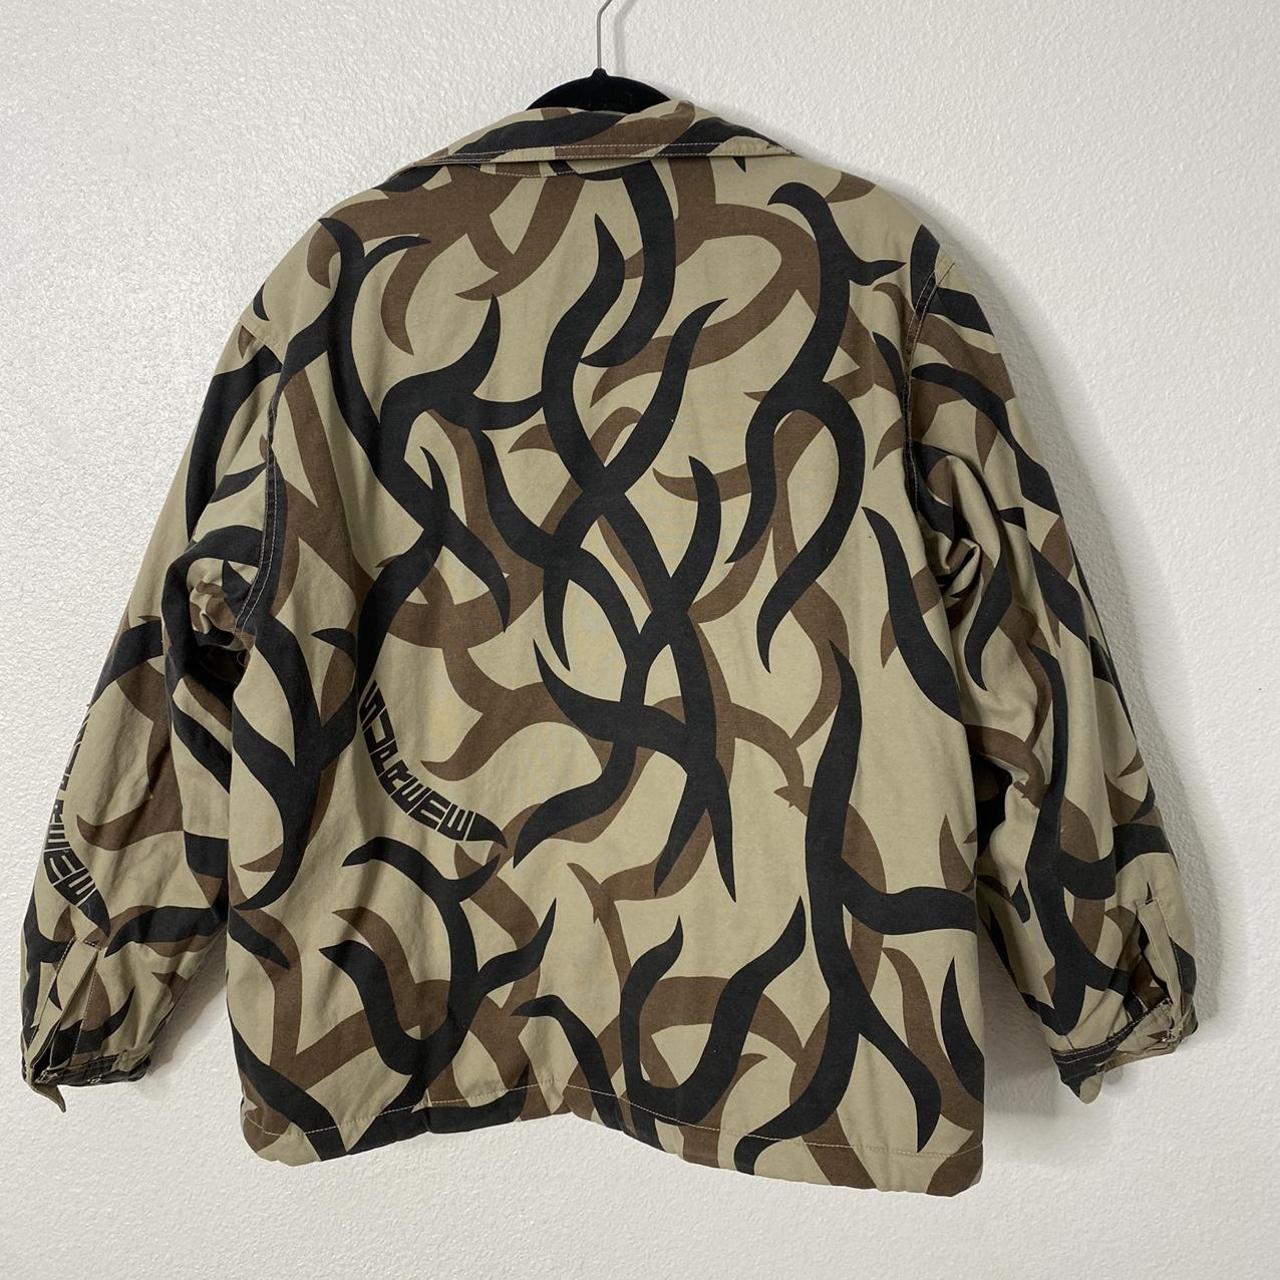 Supreme Reversible Puffy Work Jacket Bought for... - Depop